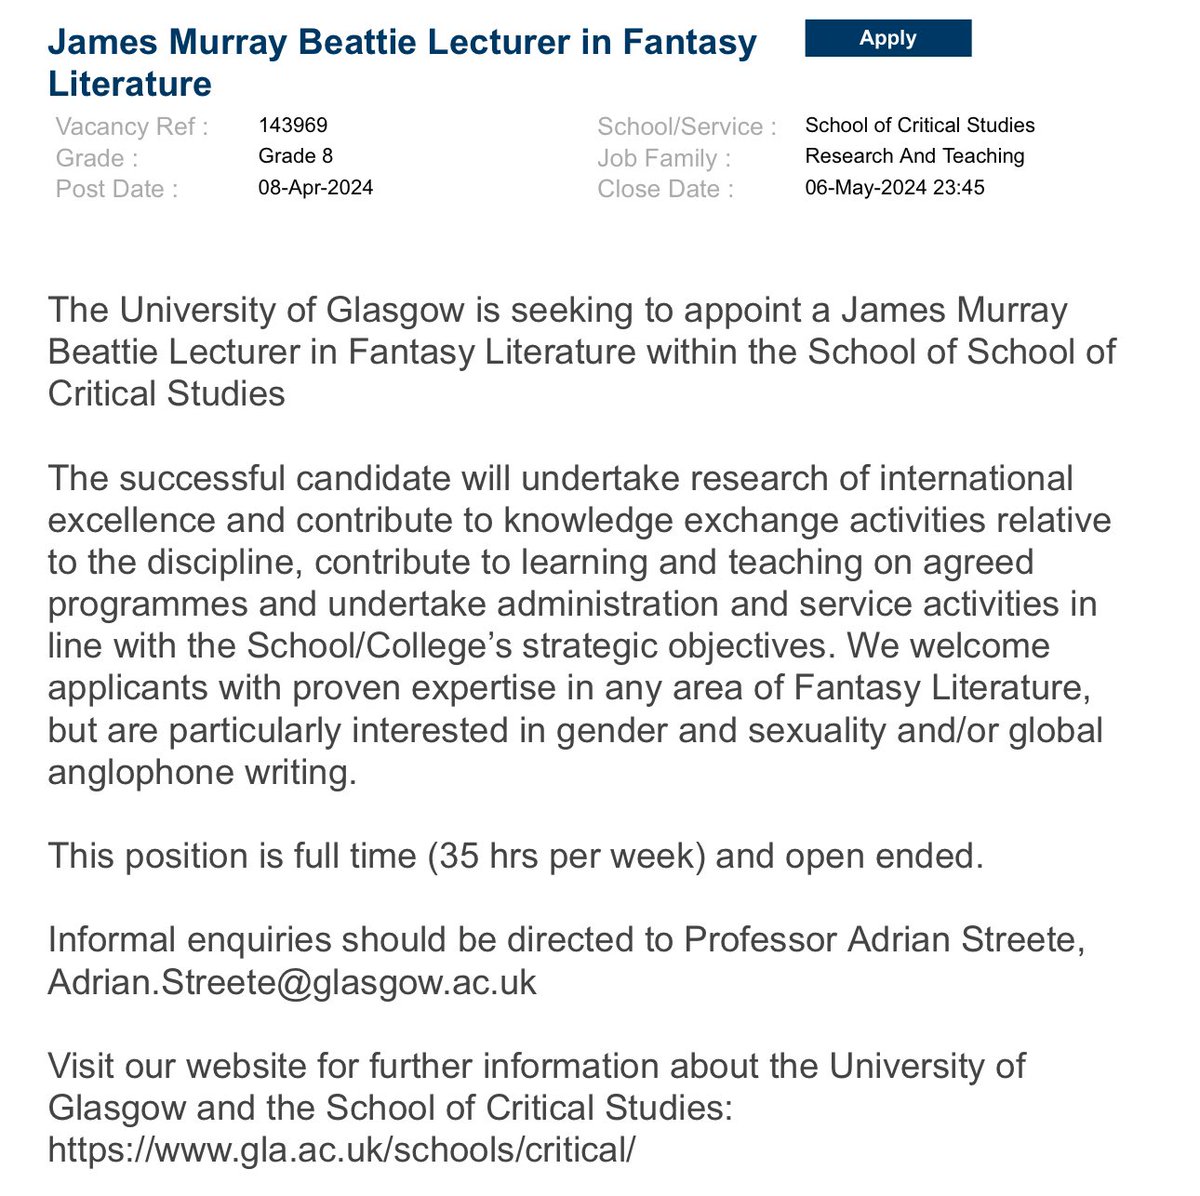 So happy to share this! New post just advertised: James Murray Beattie Lecturer in Fantasy Literature! Come and work with me, @WillTattersdill, @MJRSangster and the @UofGFantasy team! ✨🐉 🦄 For further details search for vacancy 143969 here: gla.ac.uk/explore/jobs/